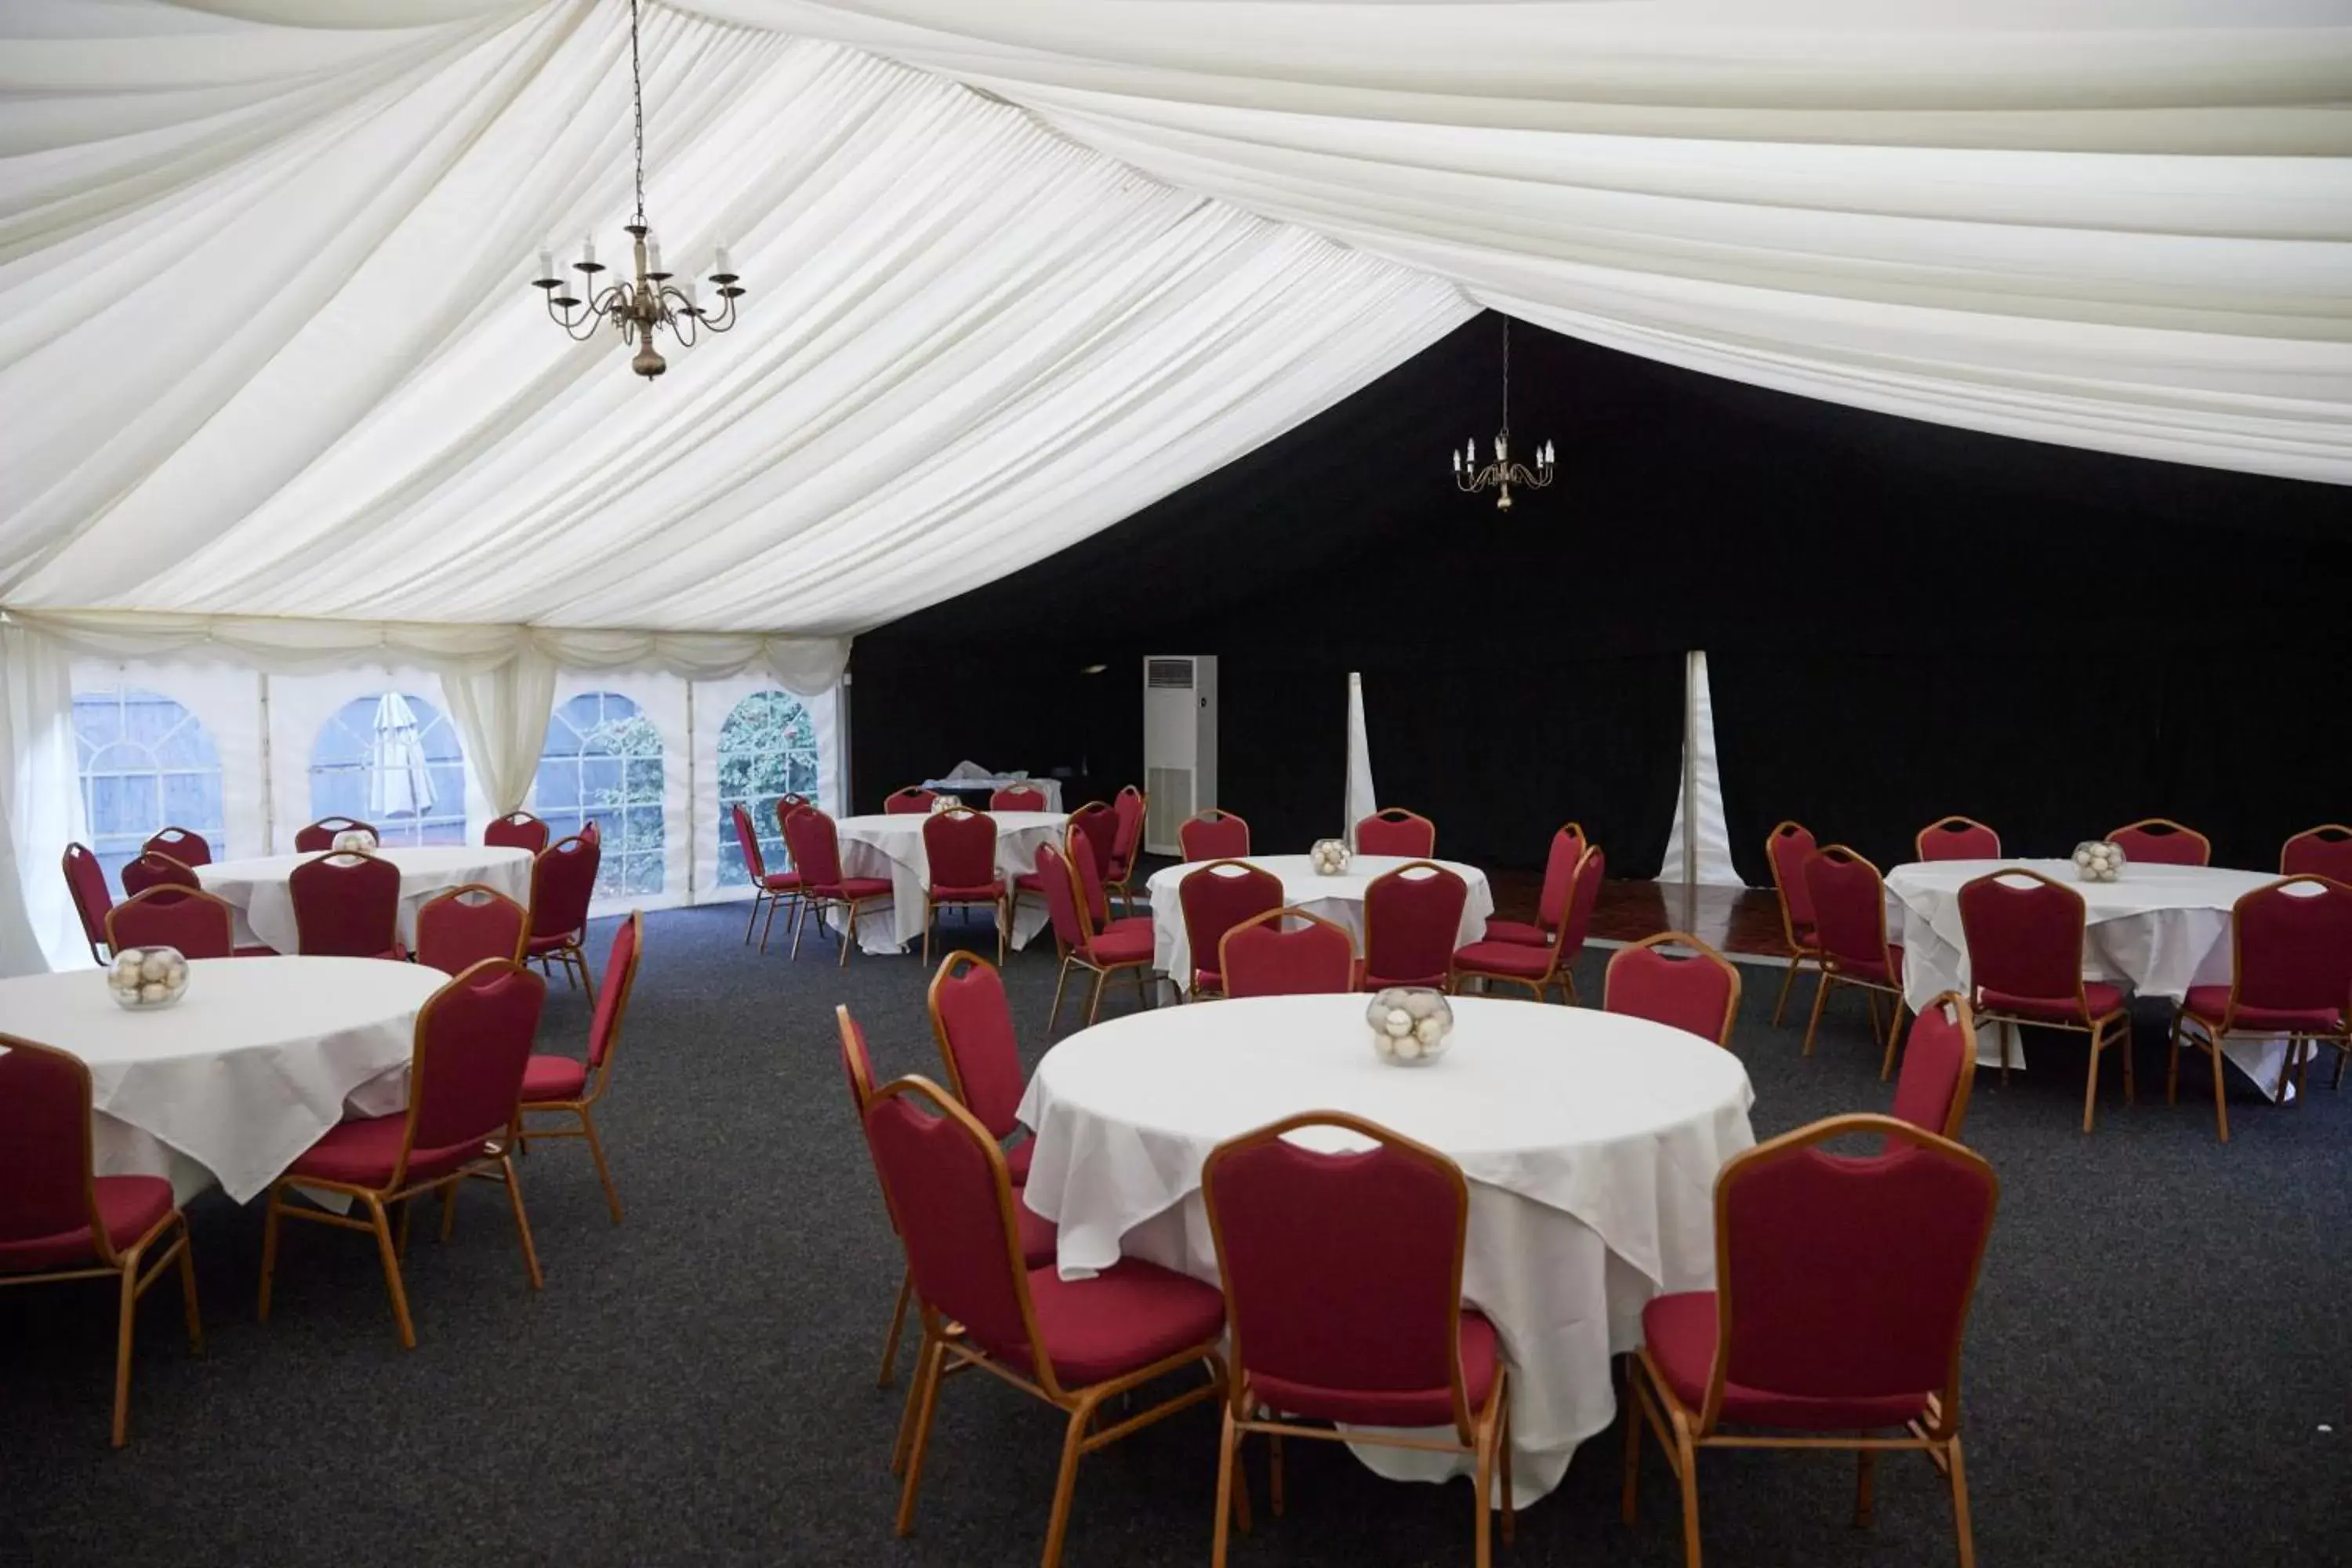 Banquet/Function facilities, Banquet Facilities in Holmfield Arms by Greene King Inns